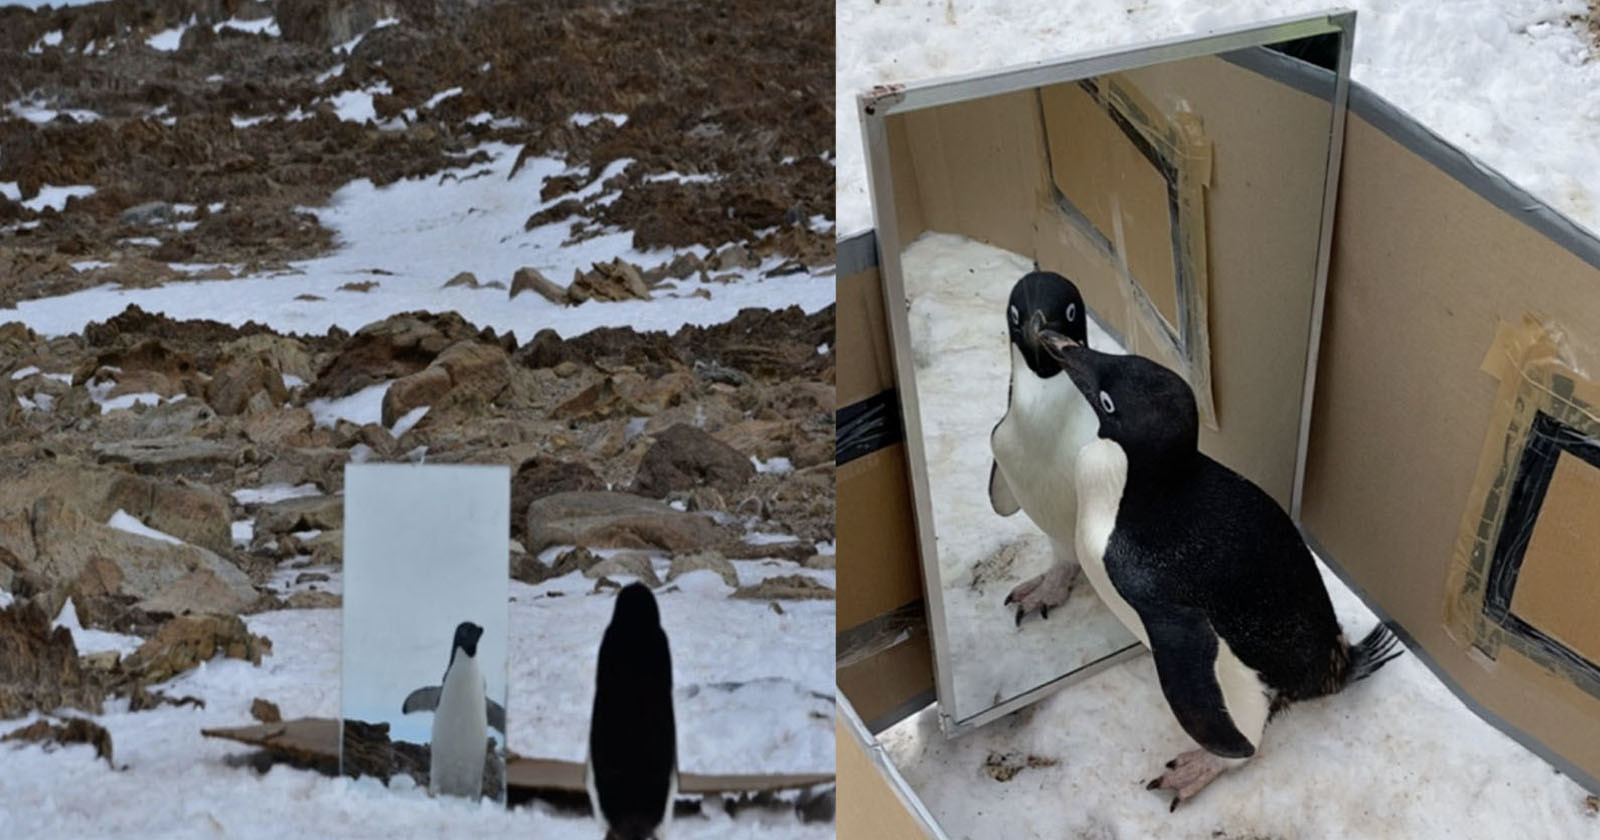  scientists photograph penguins displaying signs self-awareness 